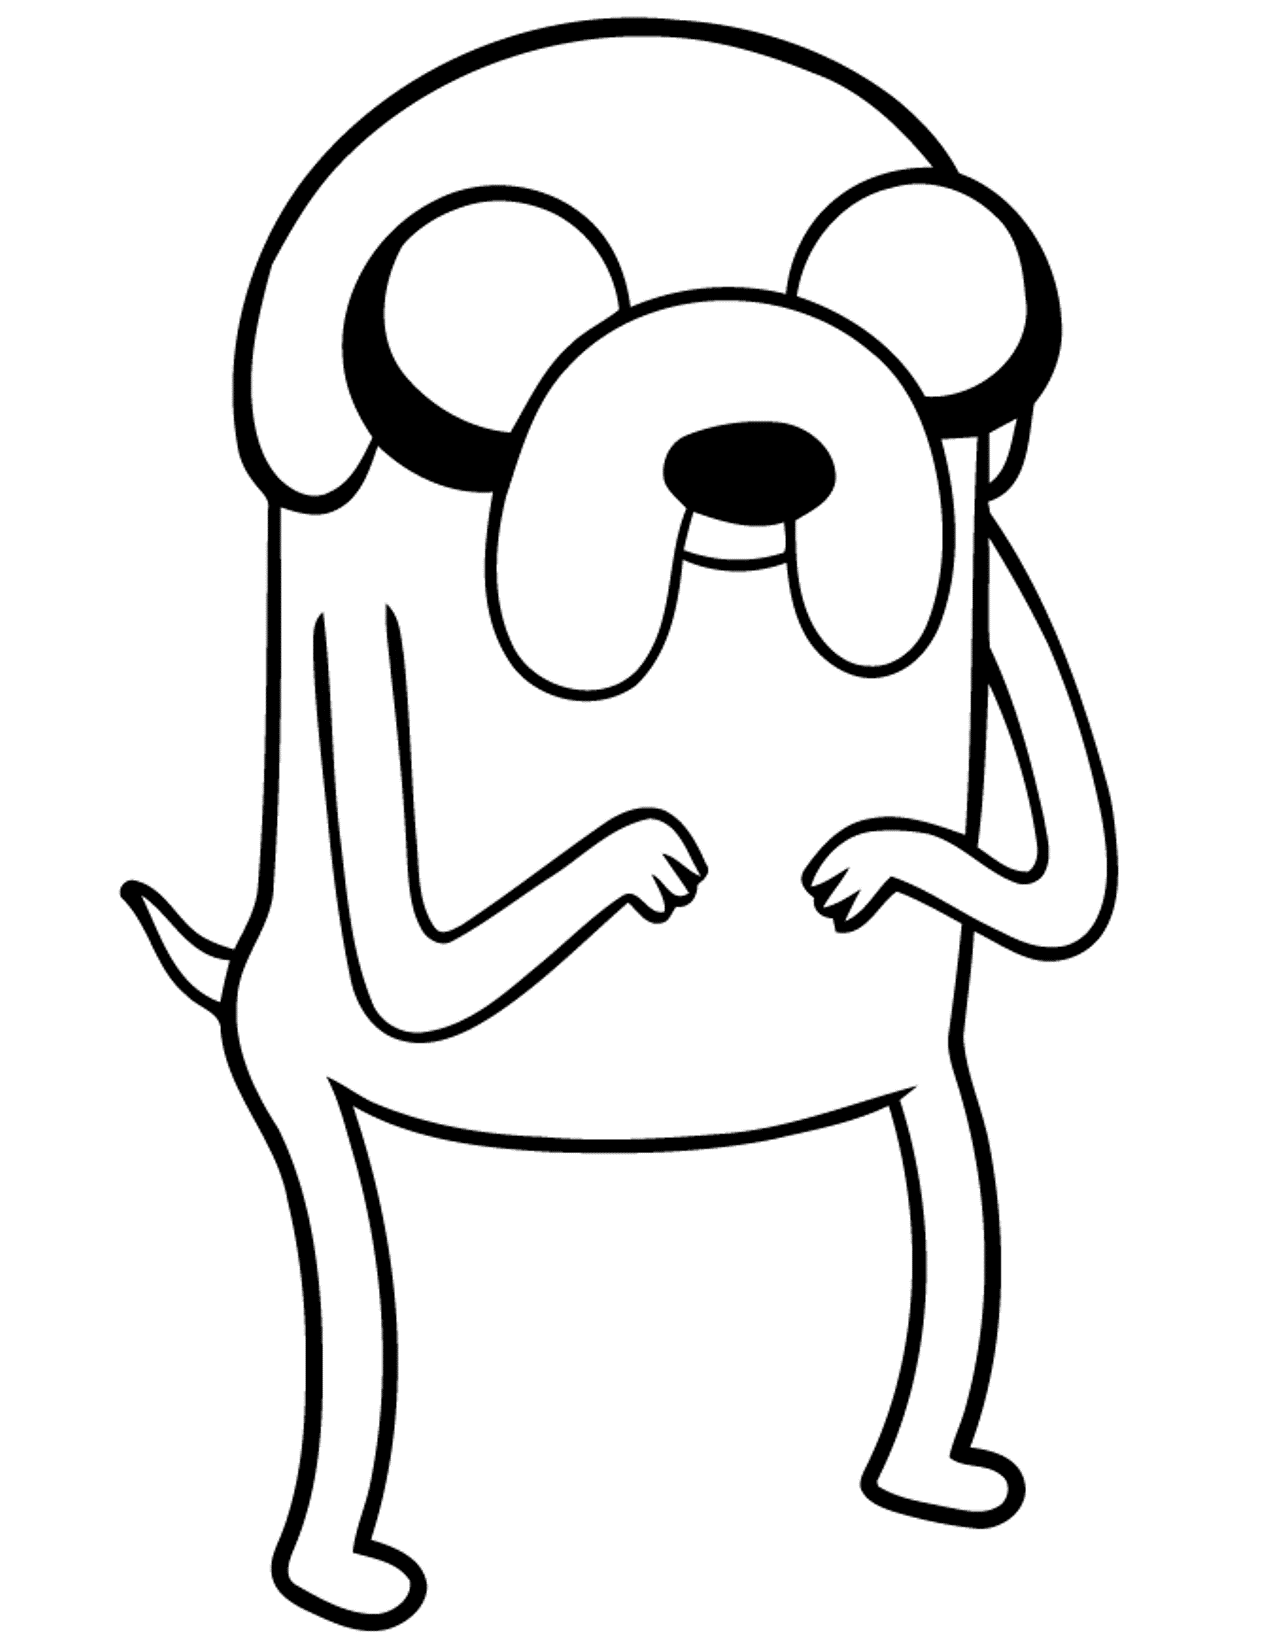 Jake The Dog Adventure Time Coloring Pages | Cartoon Coloring